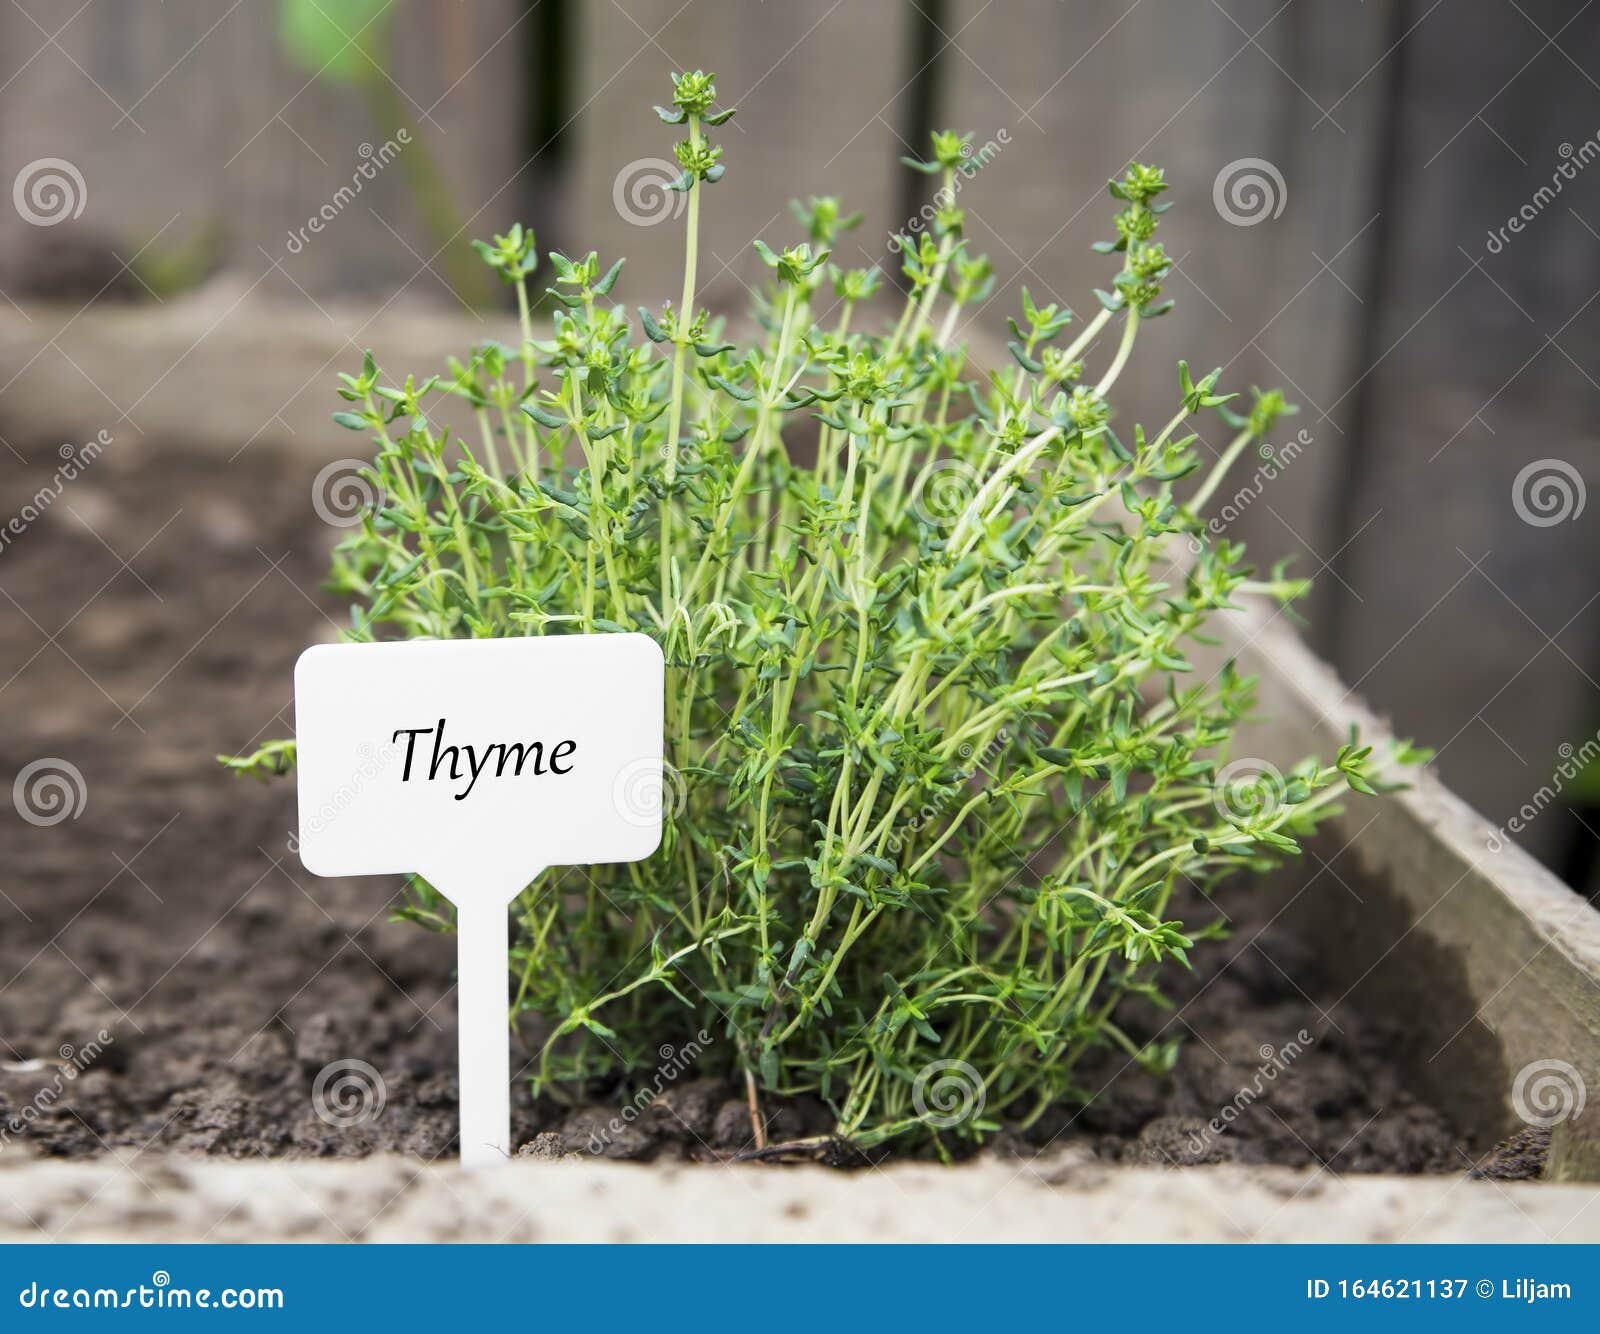 thyme herb with label in the garden